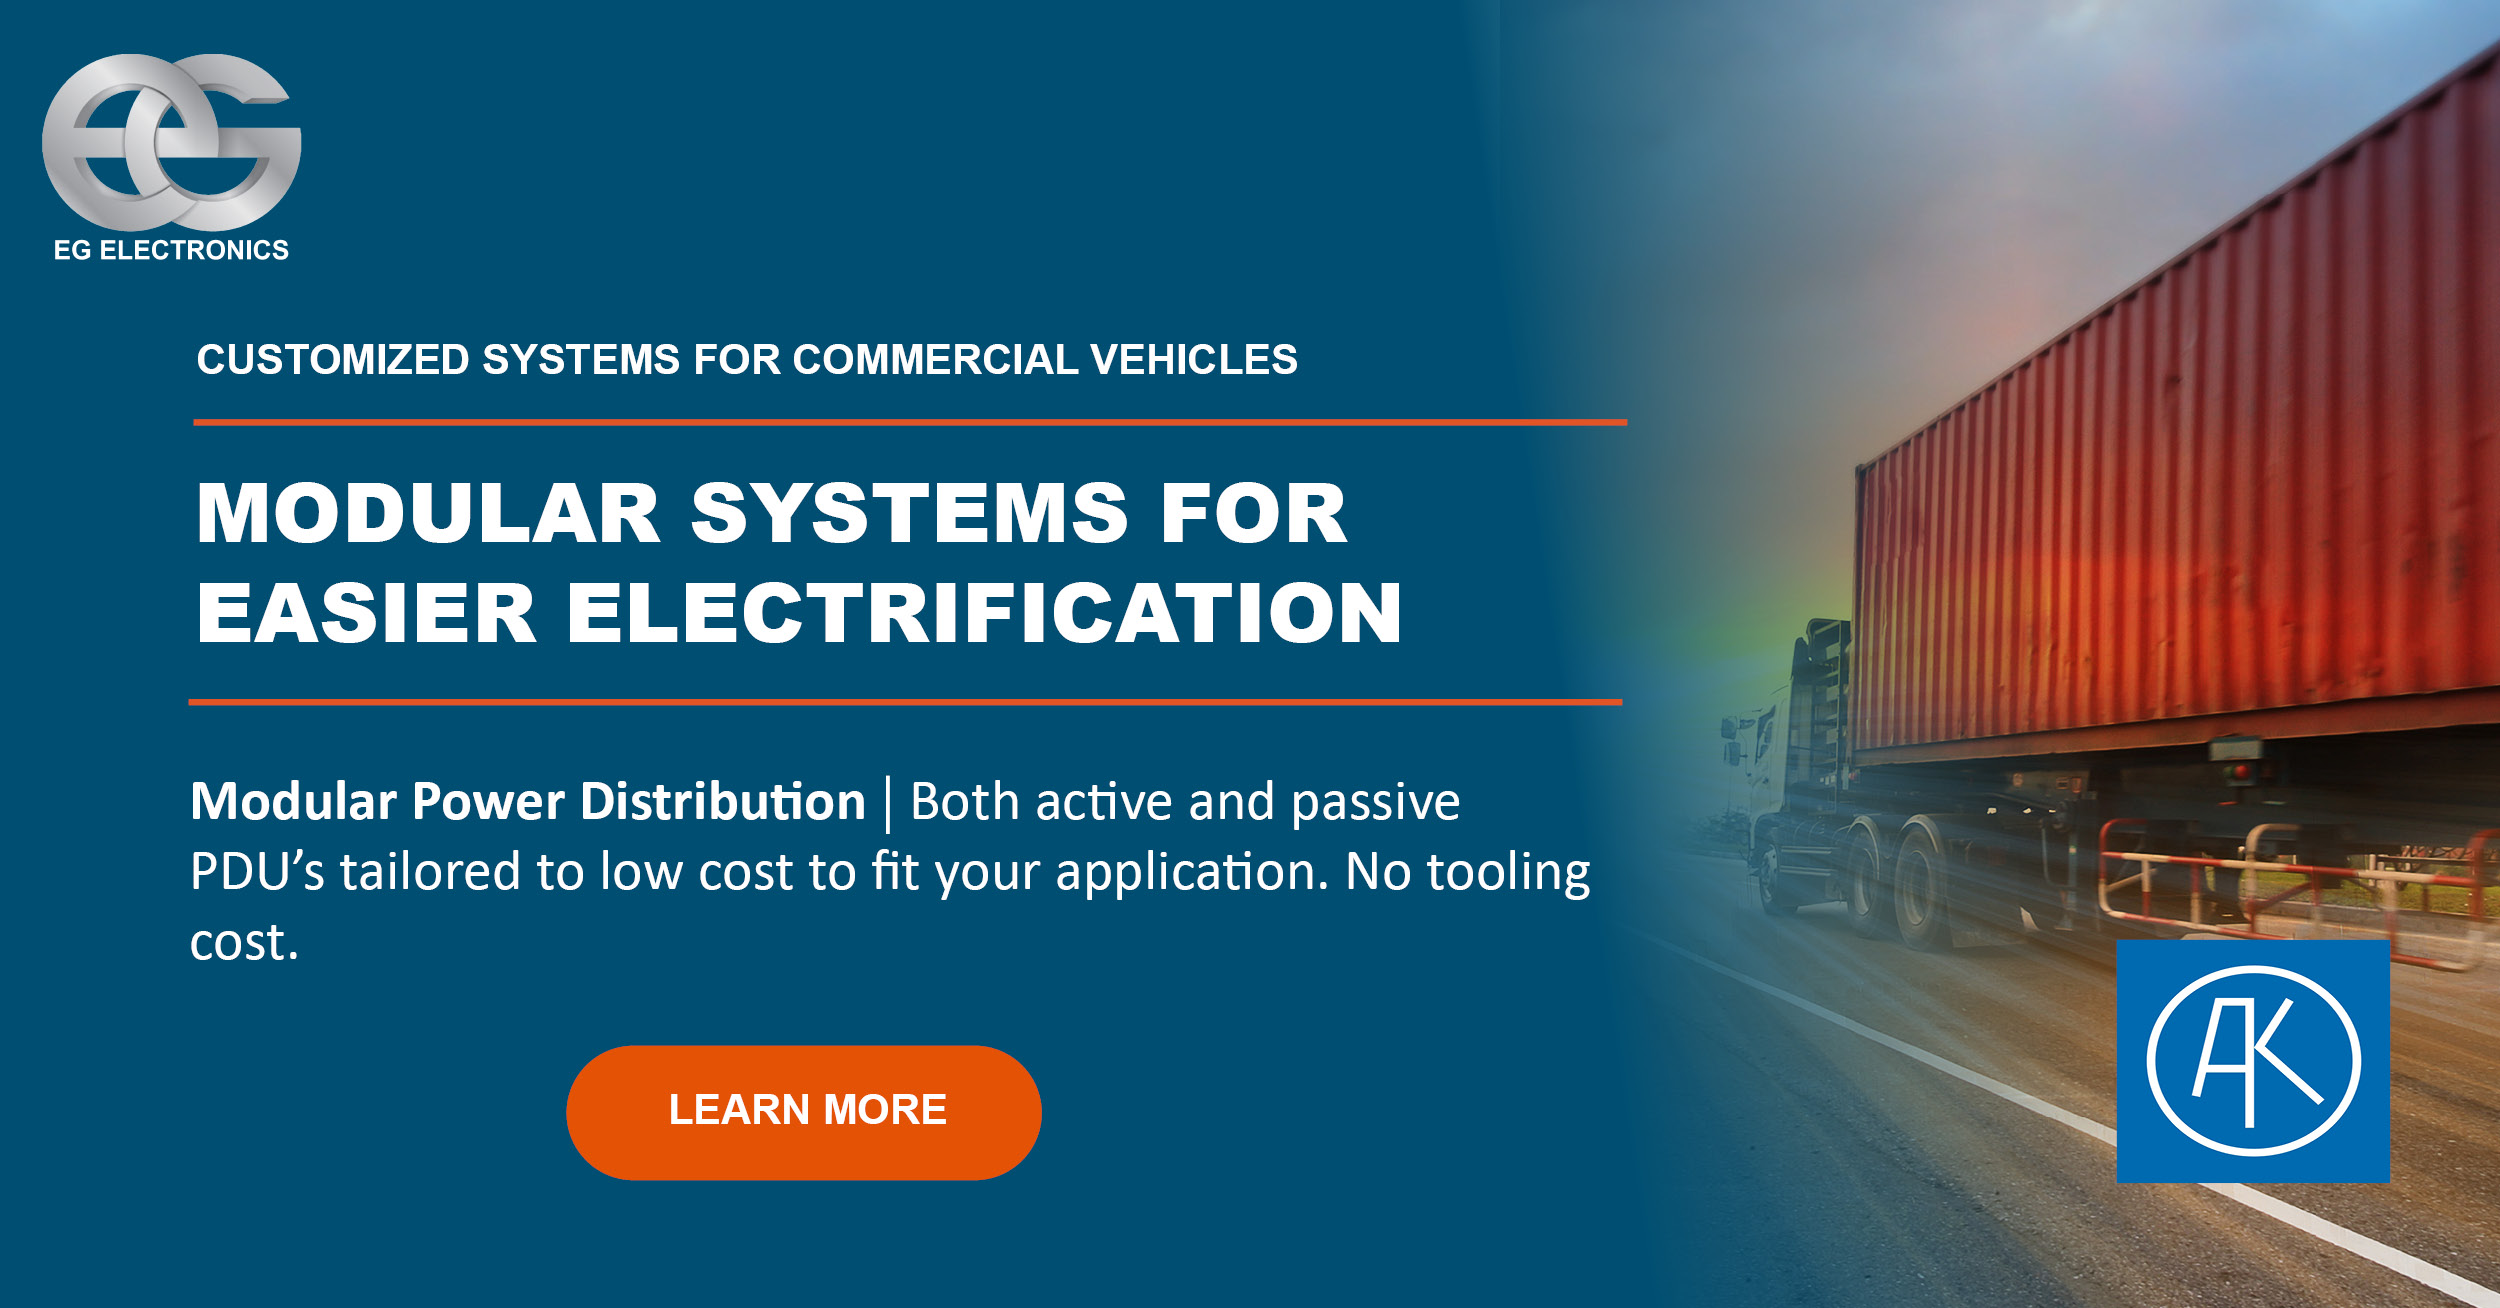 Modular Systems for Easier Electrification